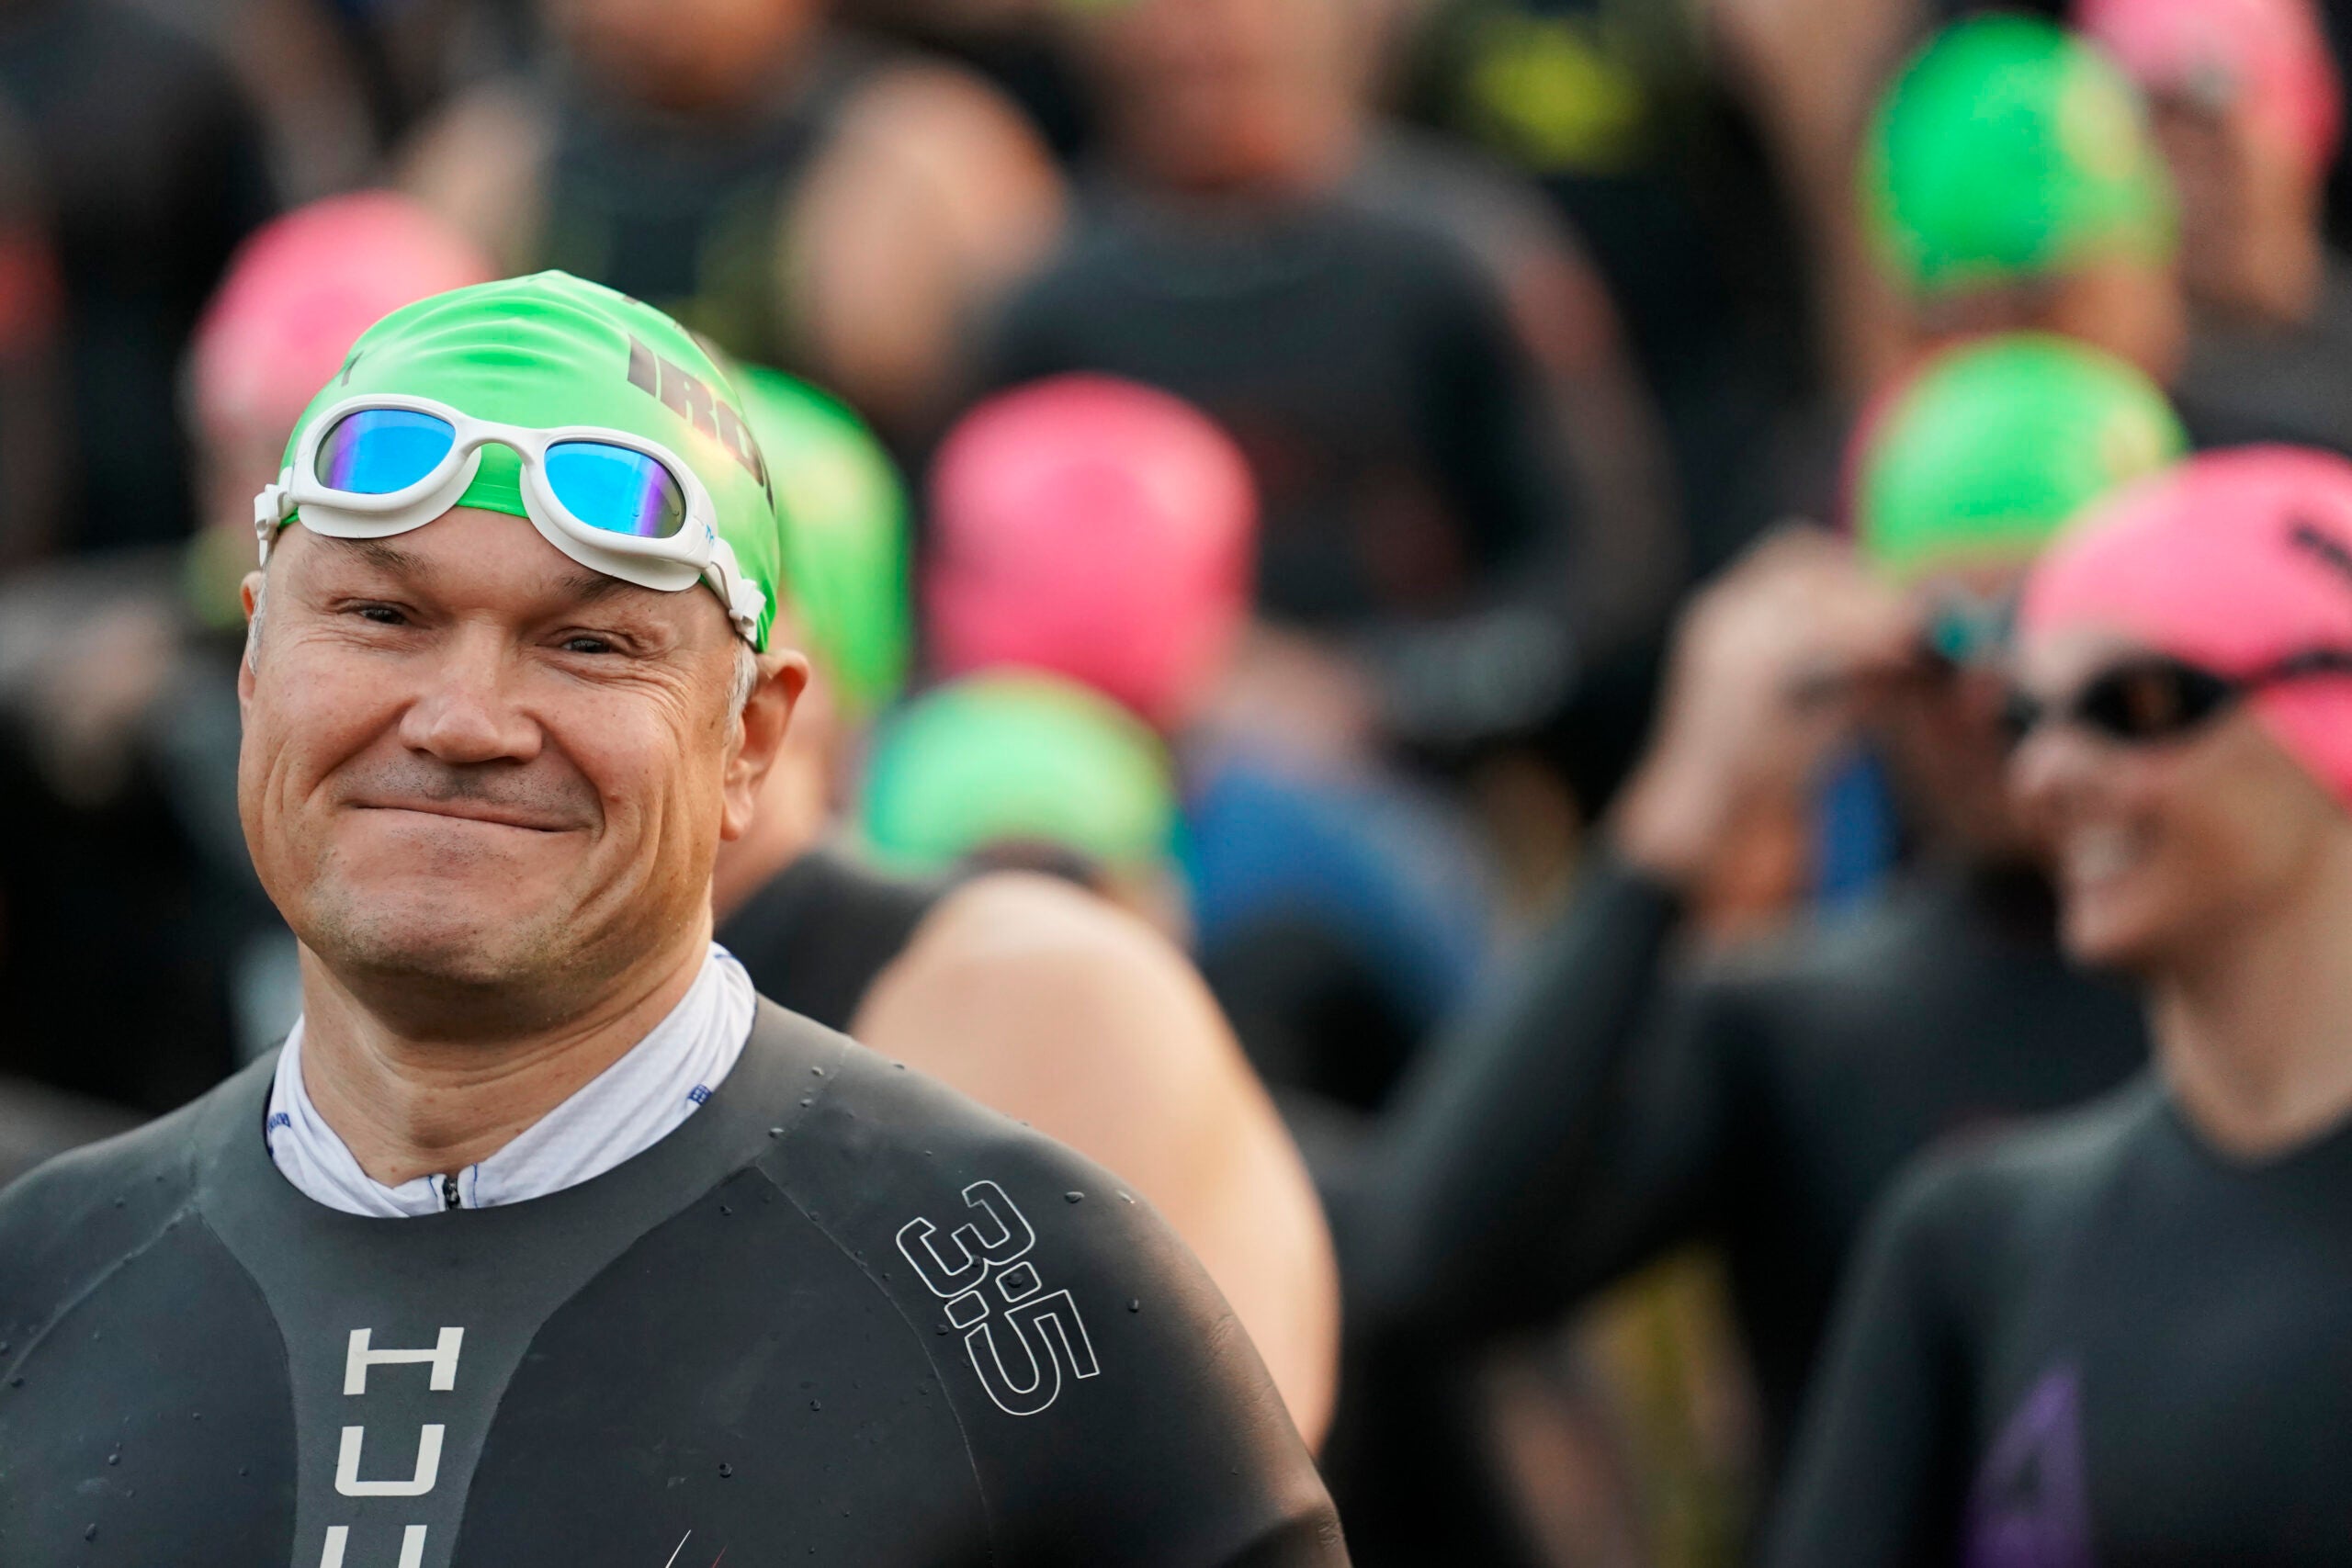 An athlete smiles before racing a half ironman